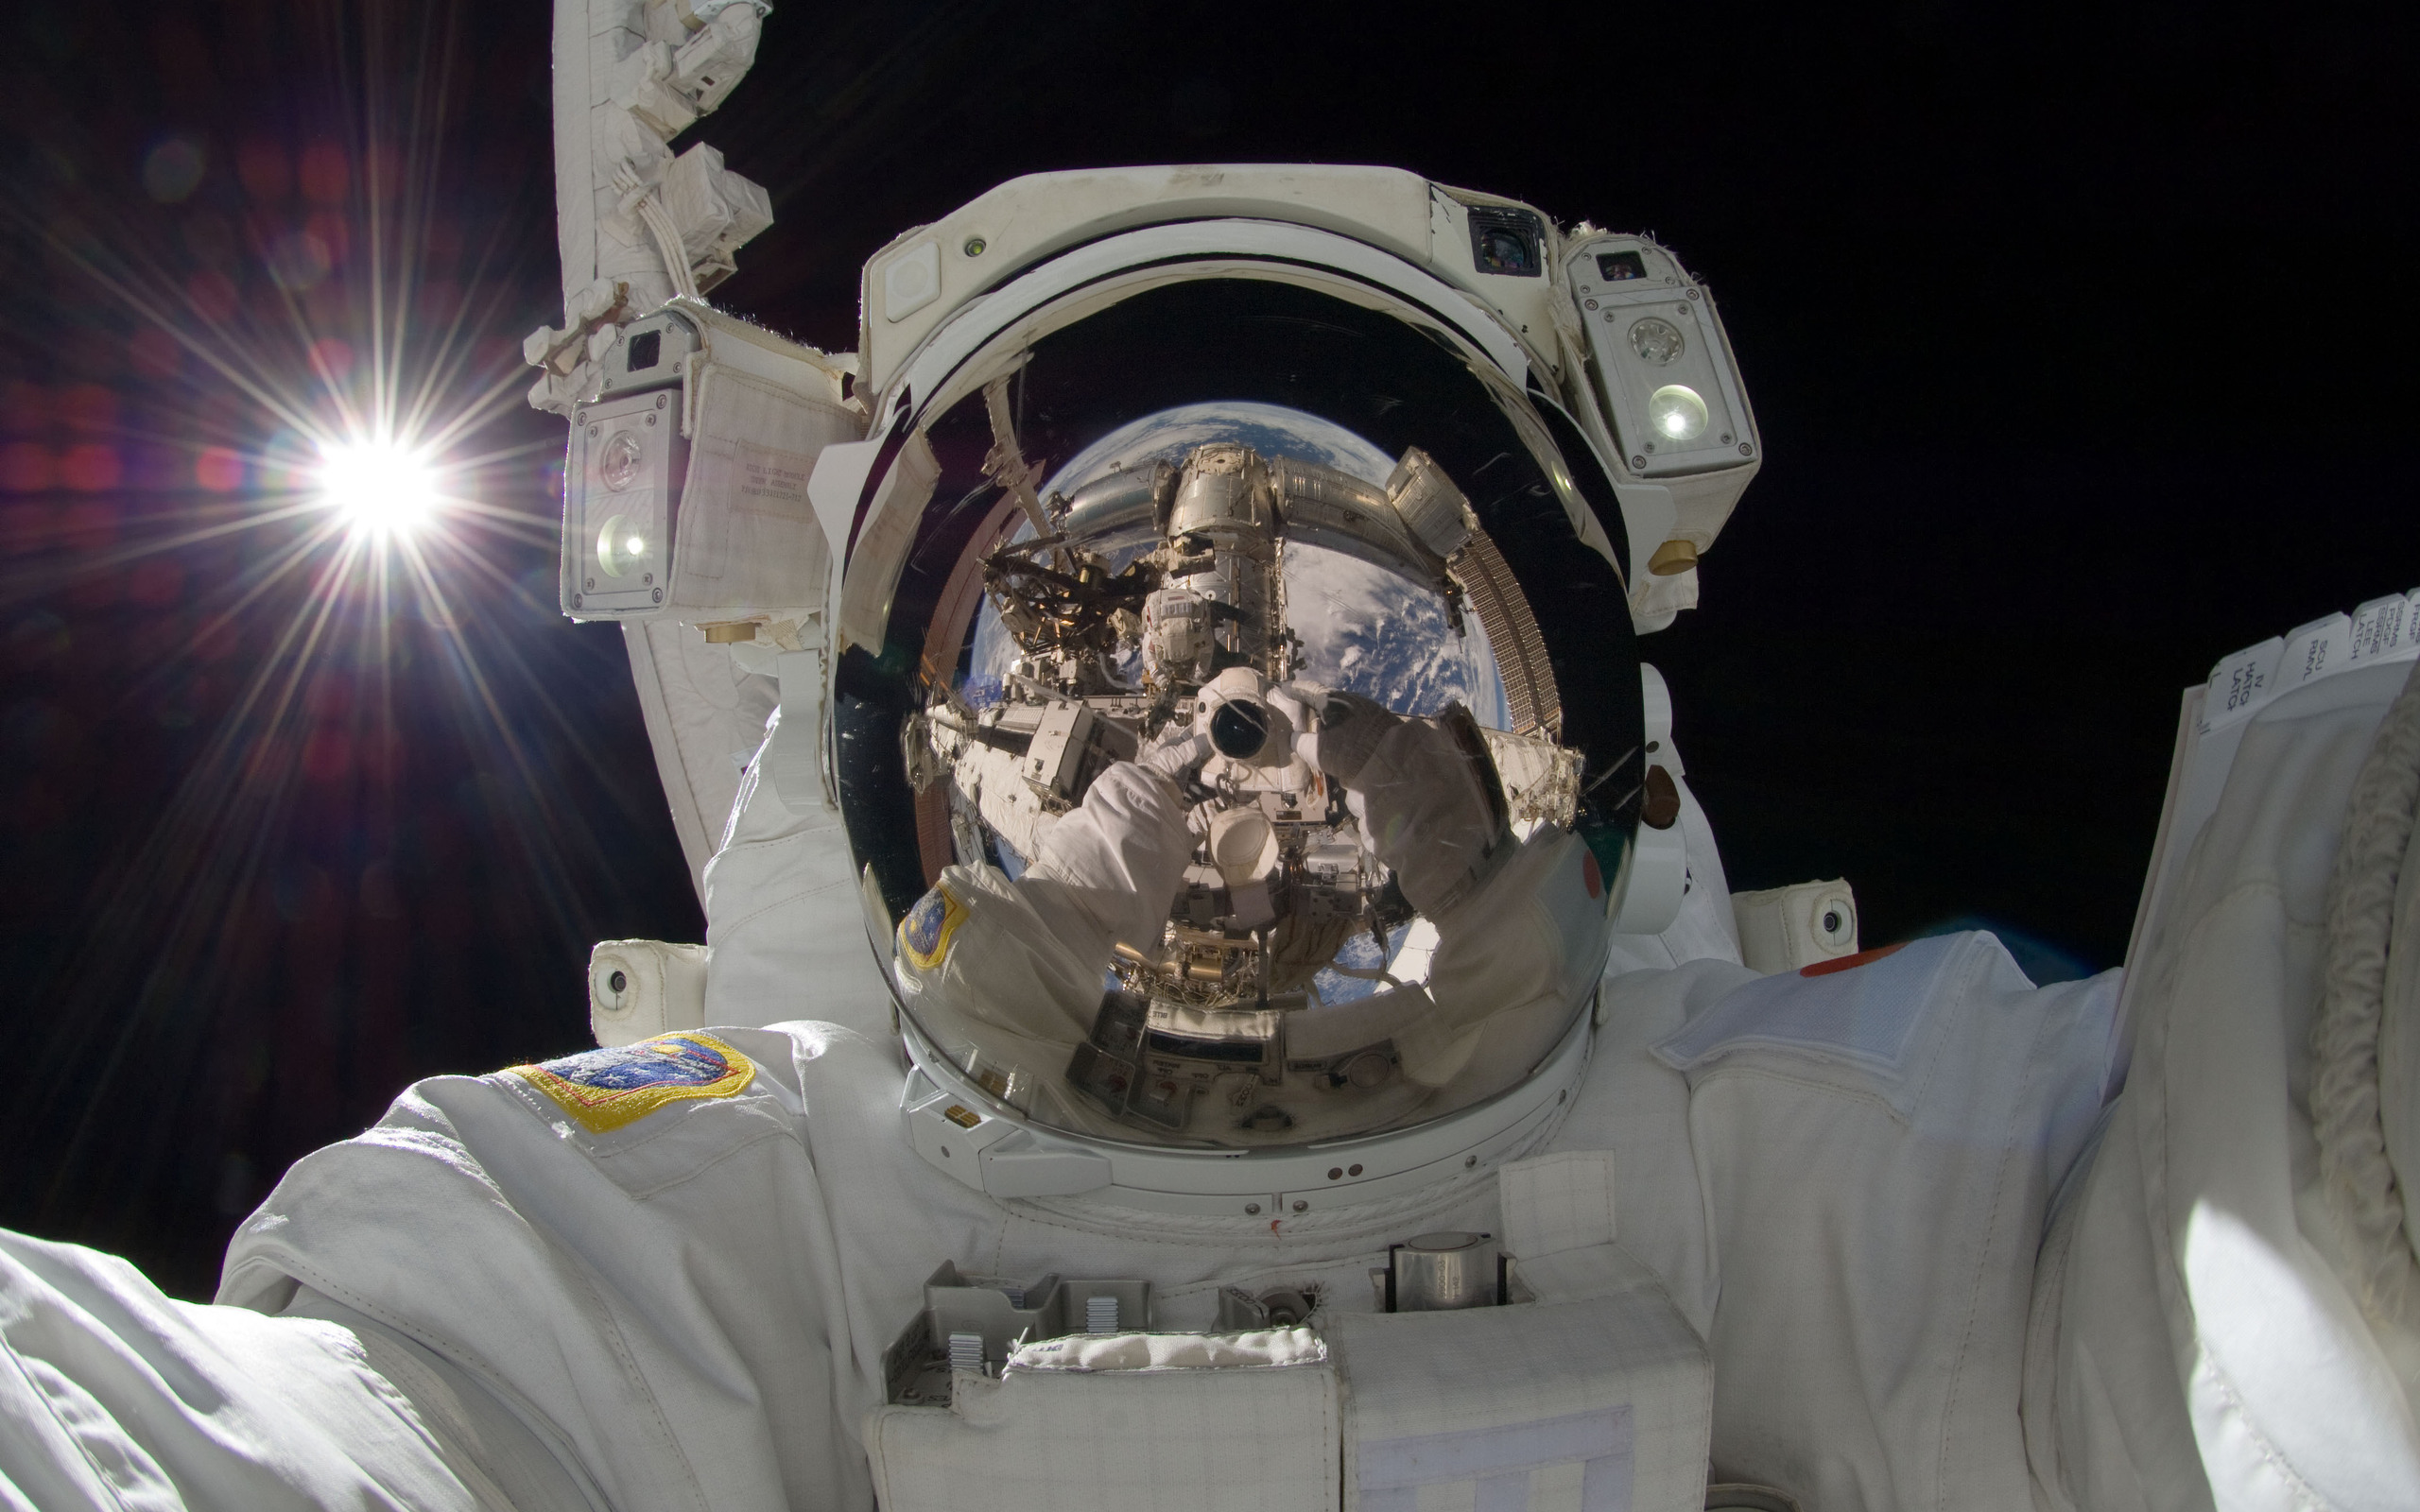 General 2560x1600 astronaut space spacesuit reflection selfies flashlight Earth space station camera NASA technology closeup